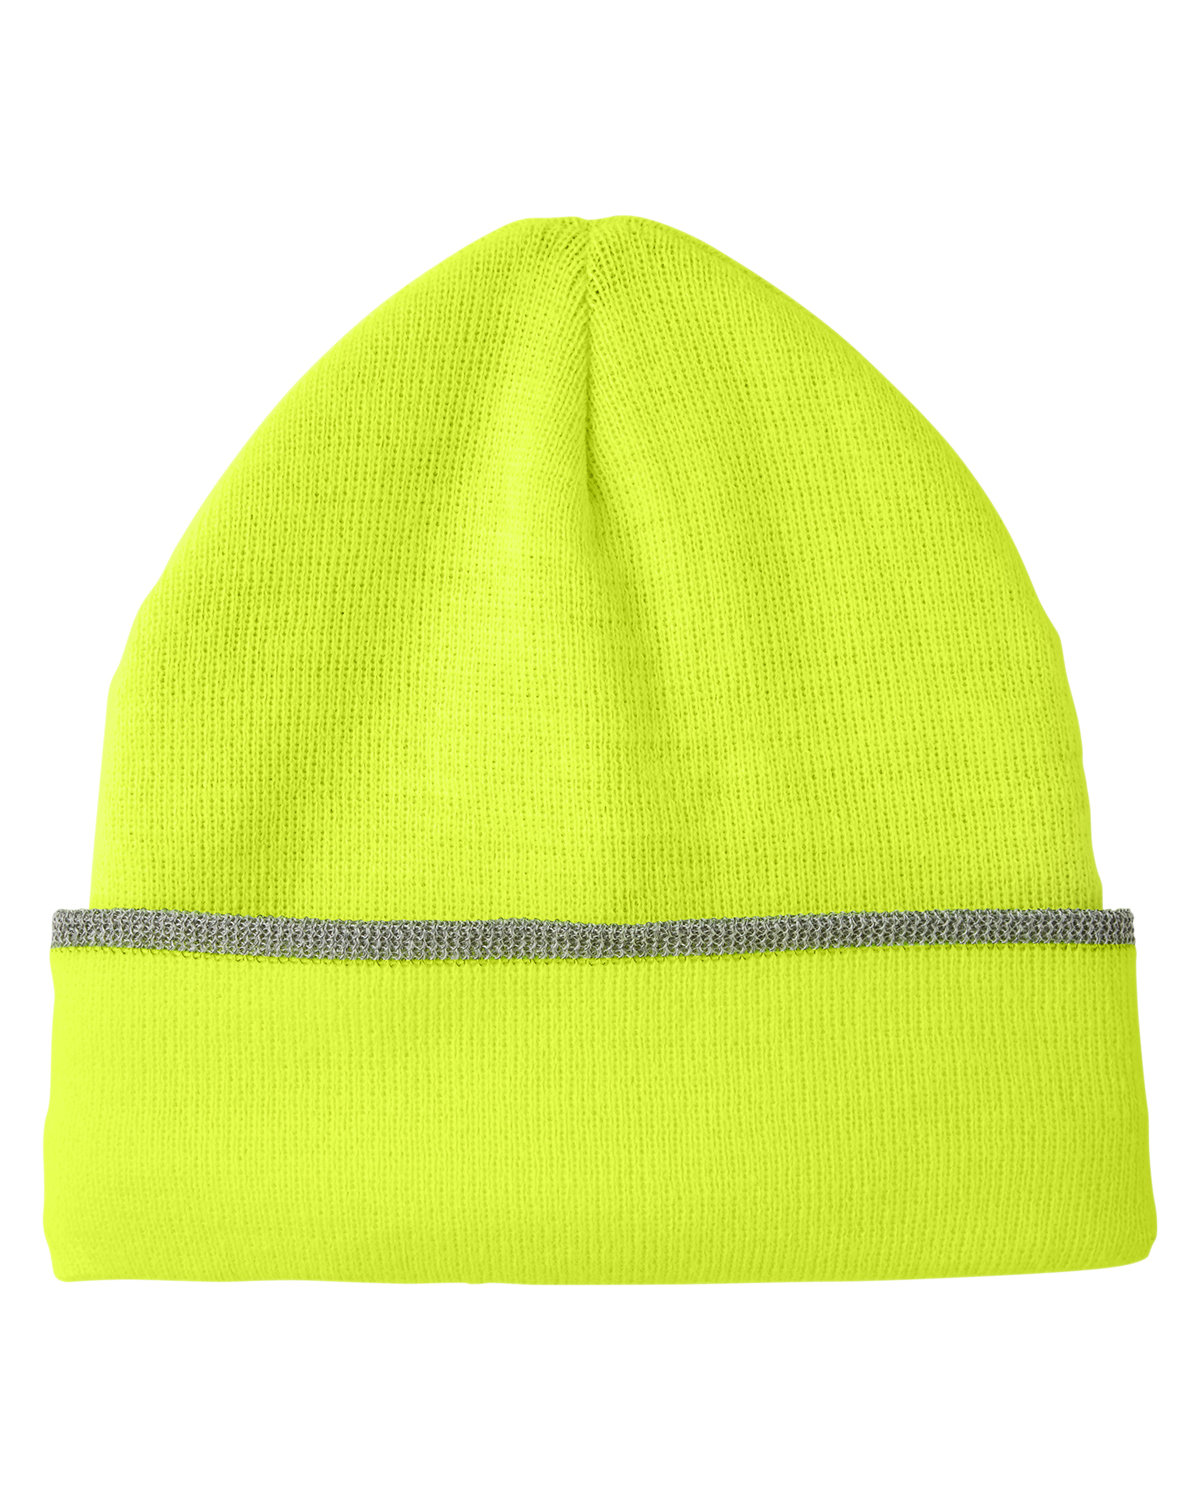 Harriton ClimaBloc™ Lined Reflective Beanie SAFETY YELLOW 